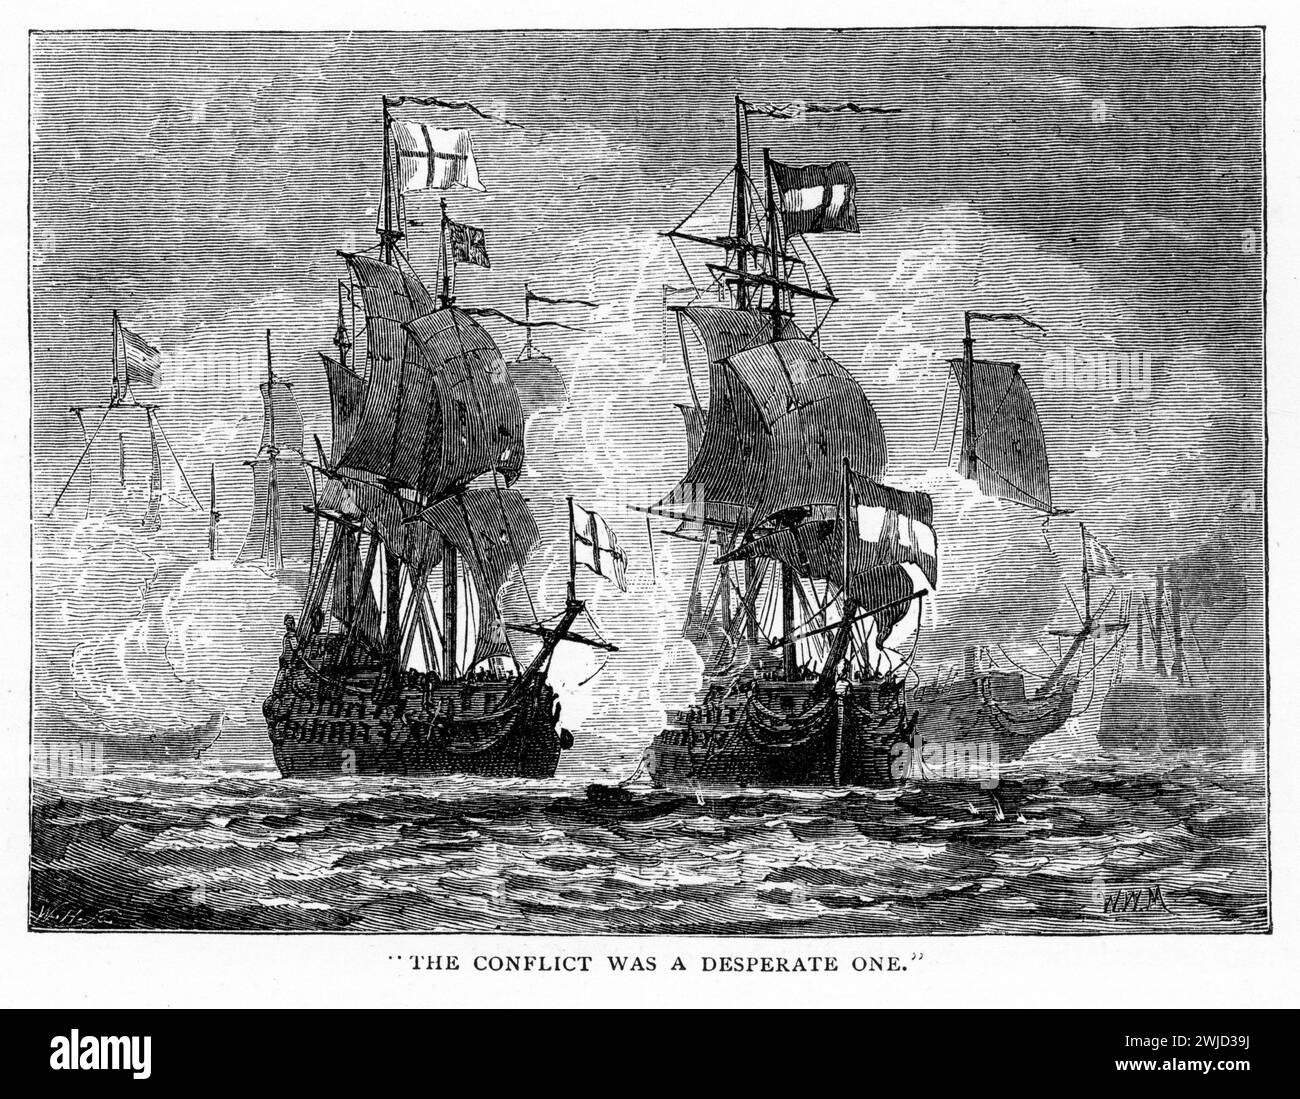 Unidentified warships at battle during the 19th century Stock Photo